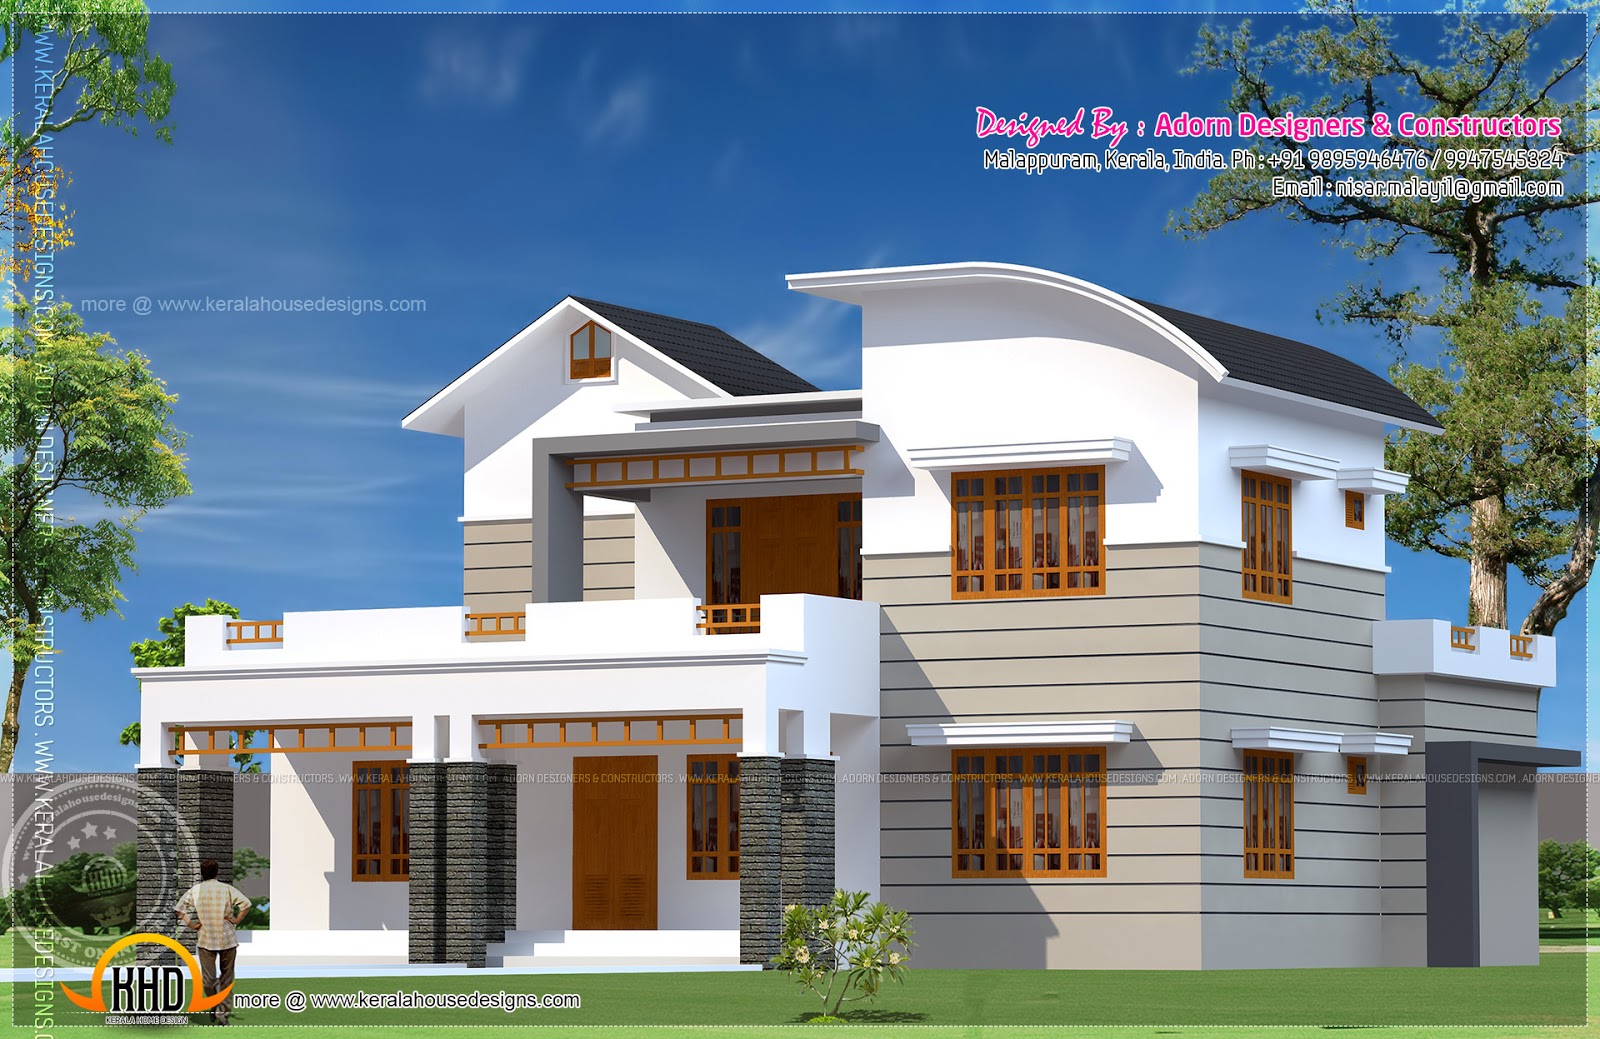  5  bedroom  house  exterior Kerala home  design and floor plans 